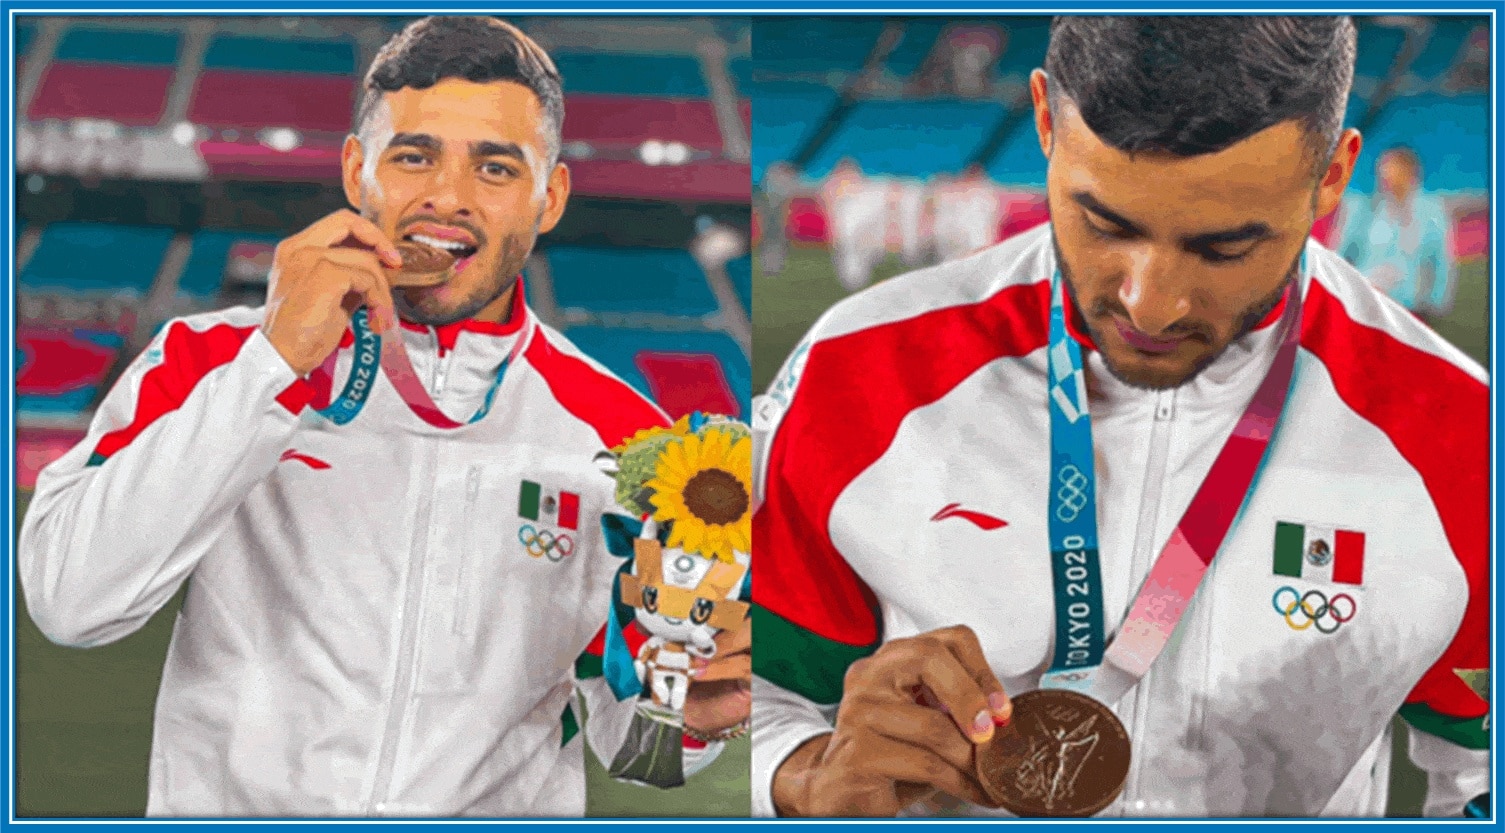 Alexis shows off his medal at the 2020 CONCACAF Olympics.